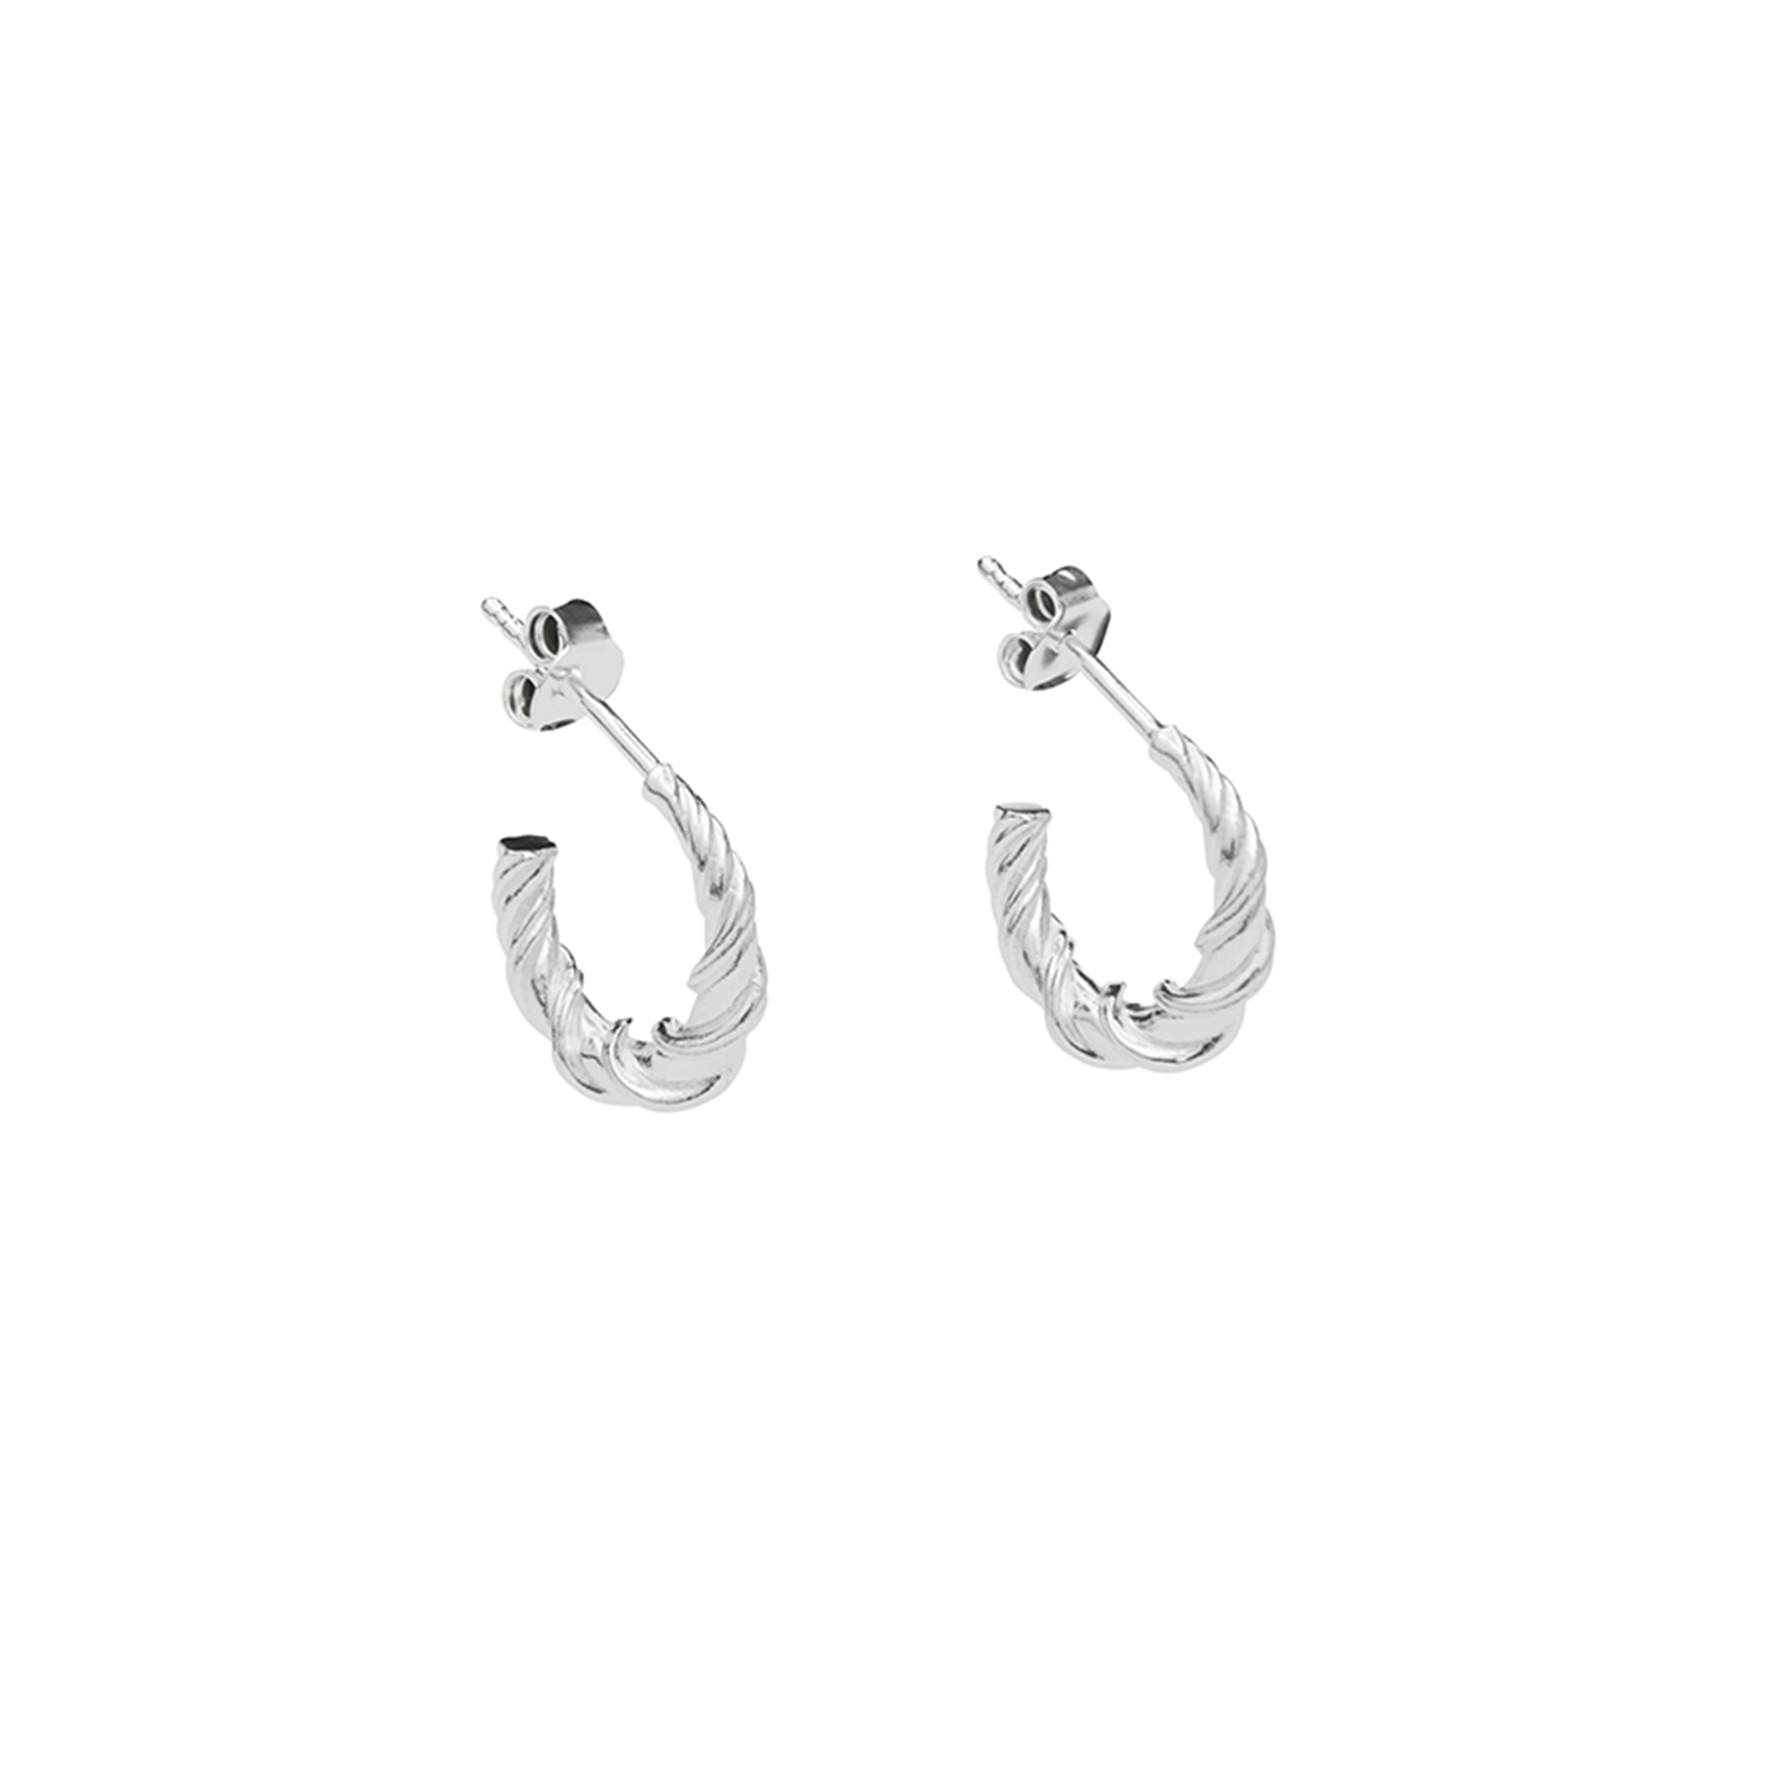 Alinor Studs from Pico in Silver Sterling 925